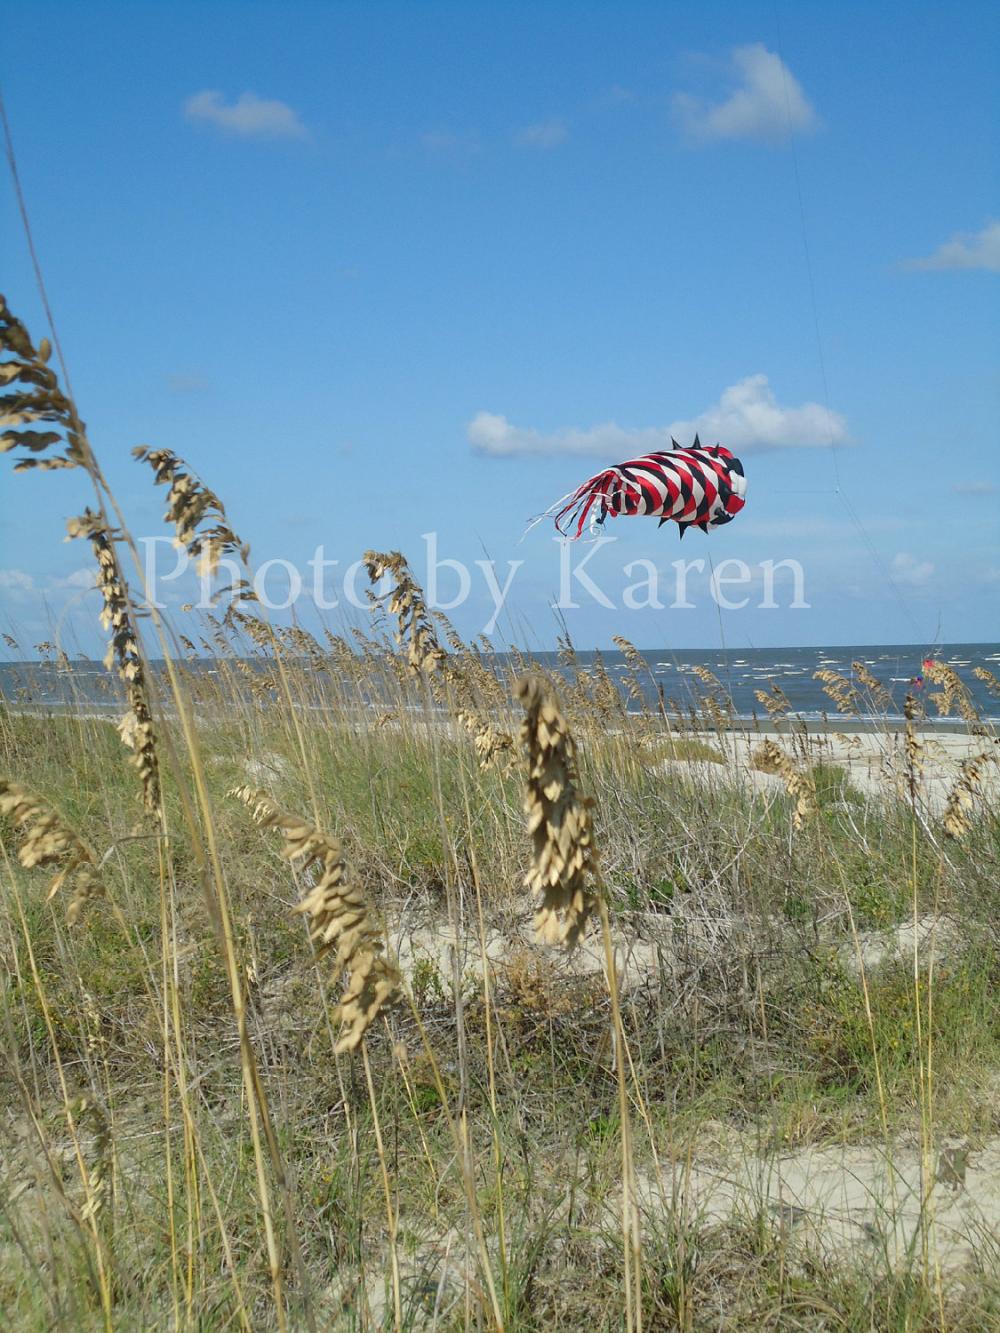 Weed Kite 5 X 7 Original Photograph, Other Sizes Available